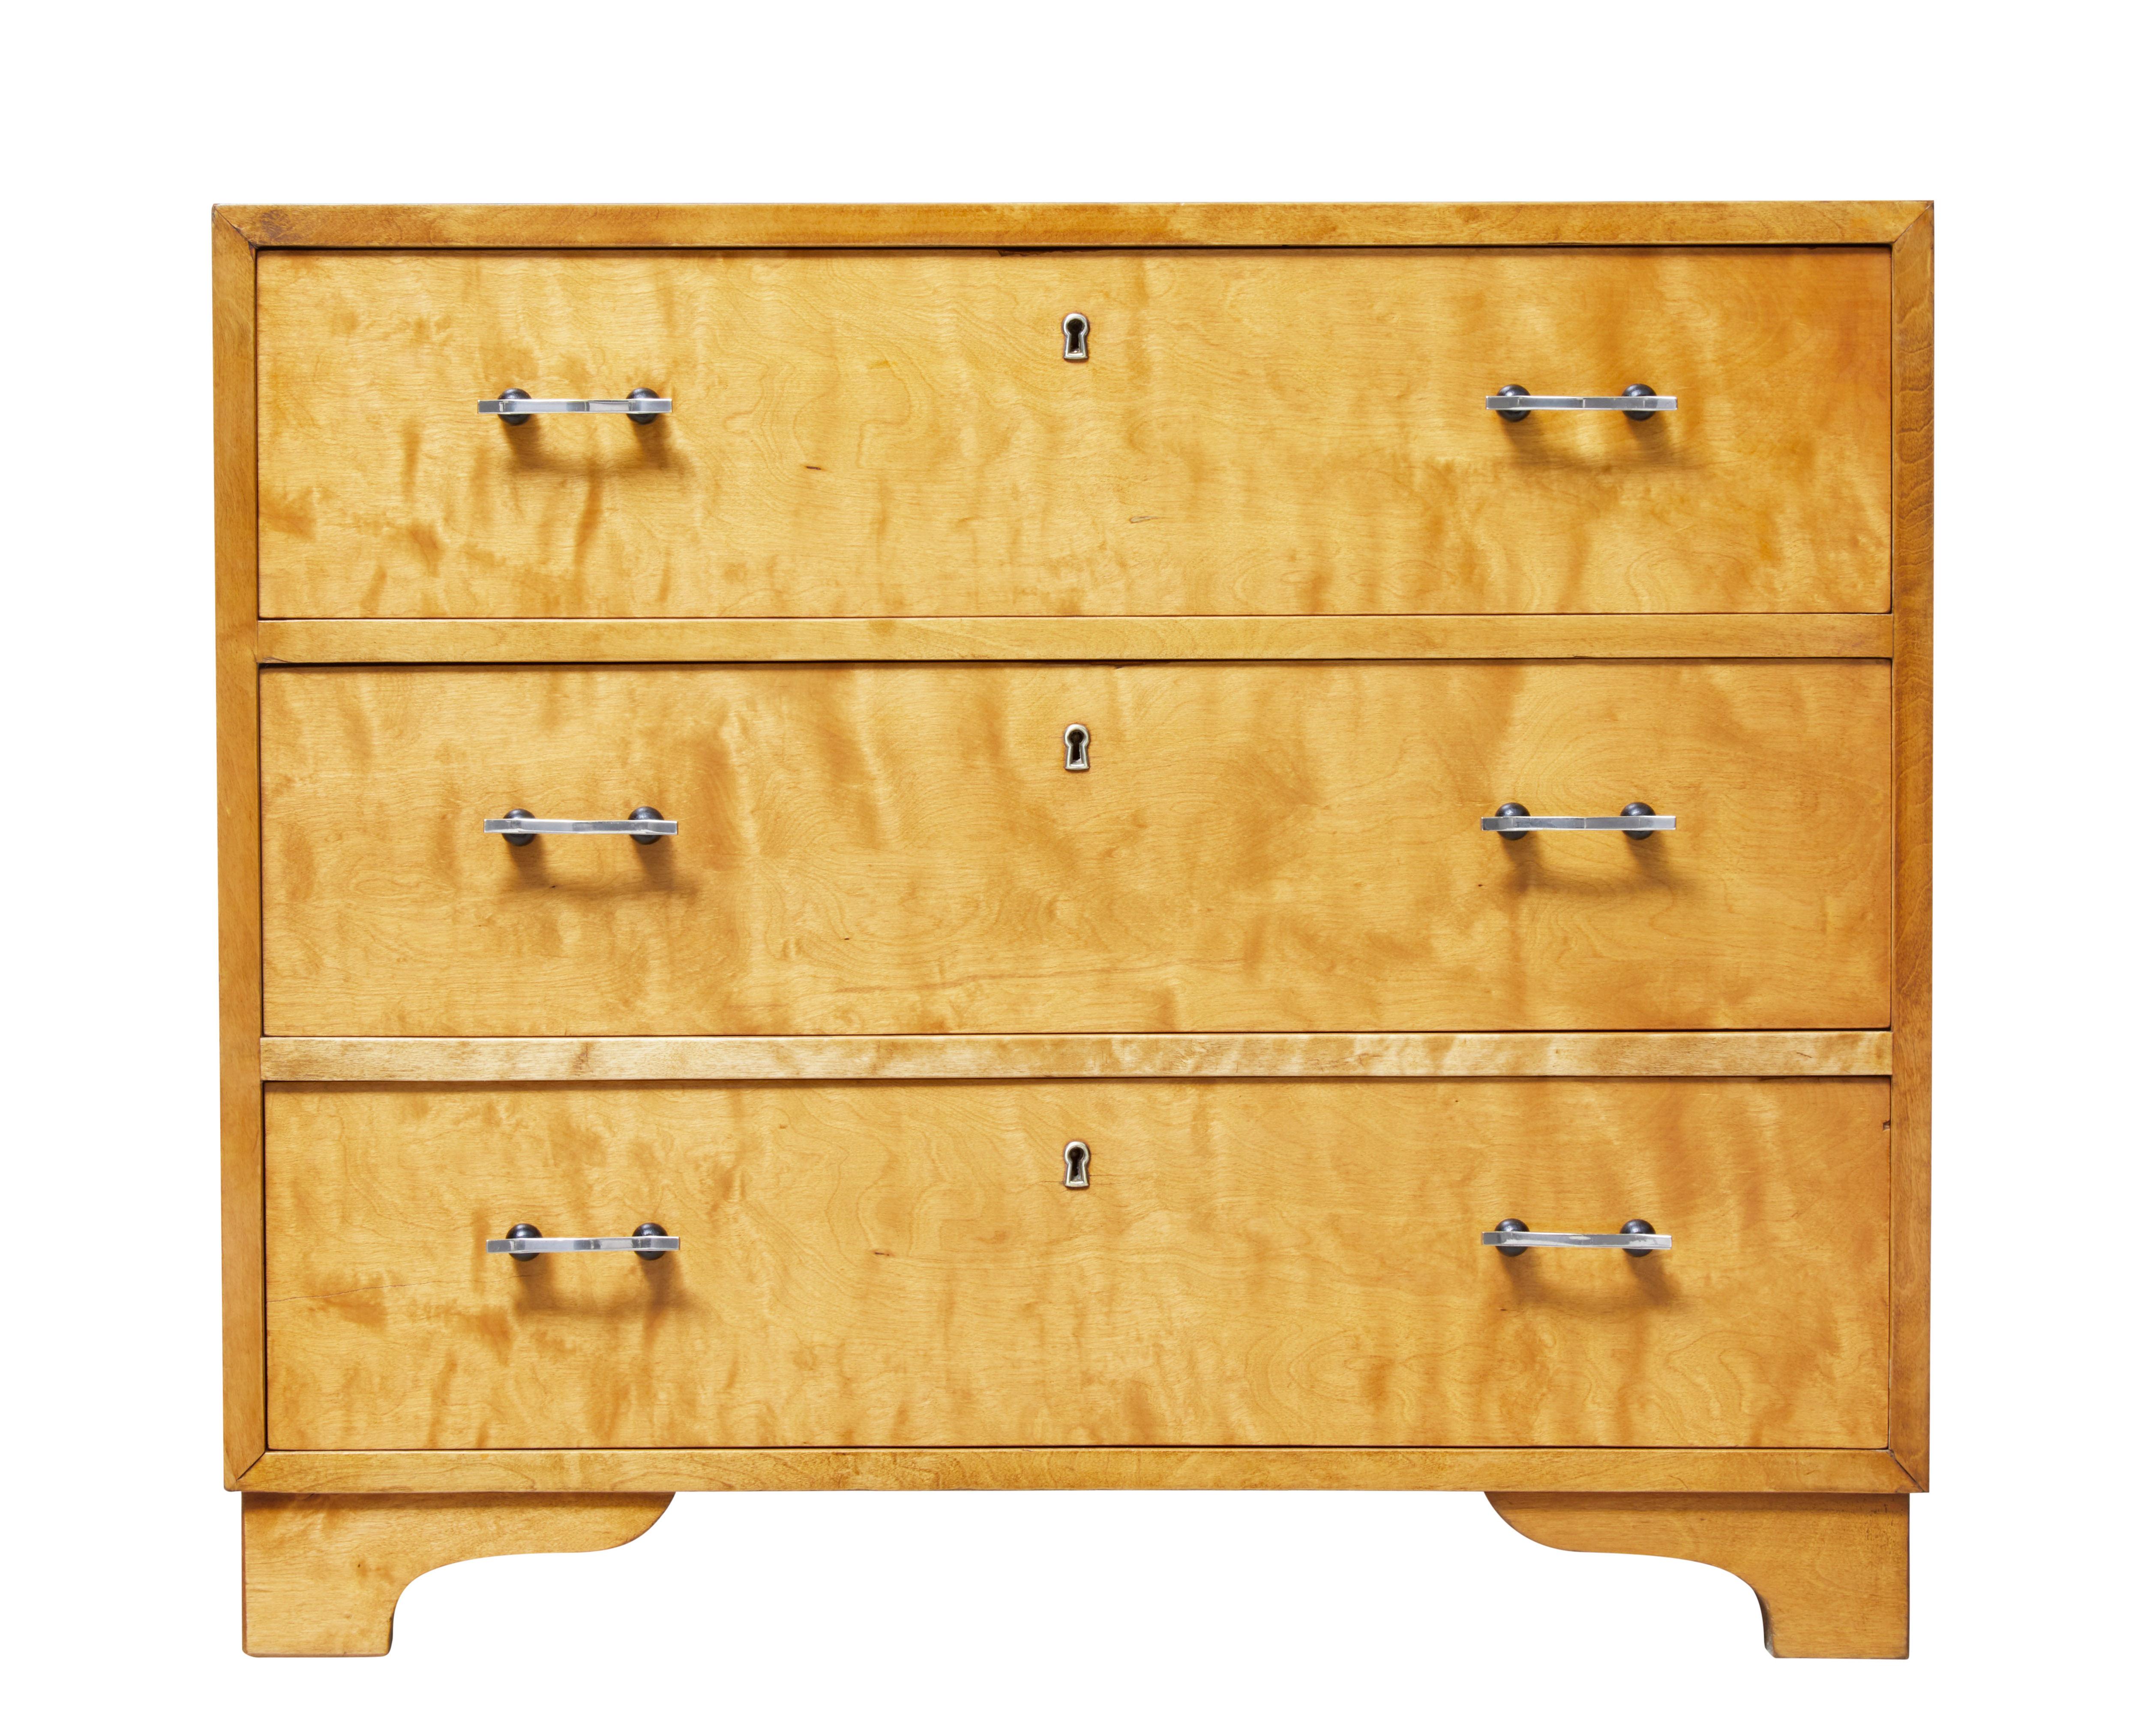 Good quality Swedish chest of drawers, circa 1940.

Three drawers of equal proportion fitted with shaped steel handles. Rich golden color.

Recently restored with minor restorations to veneer, minor surface marks.